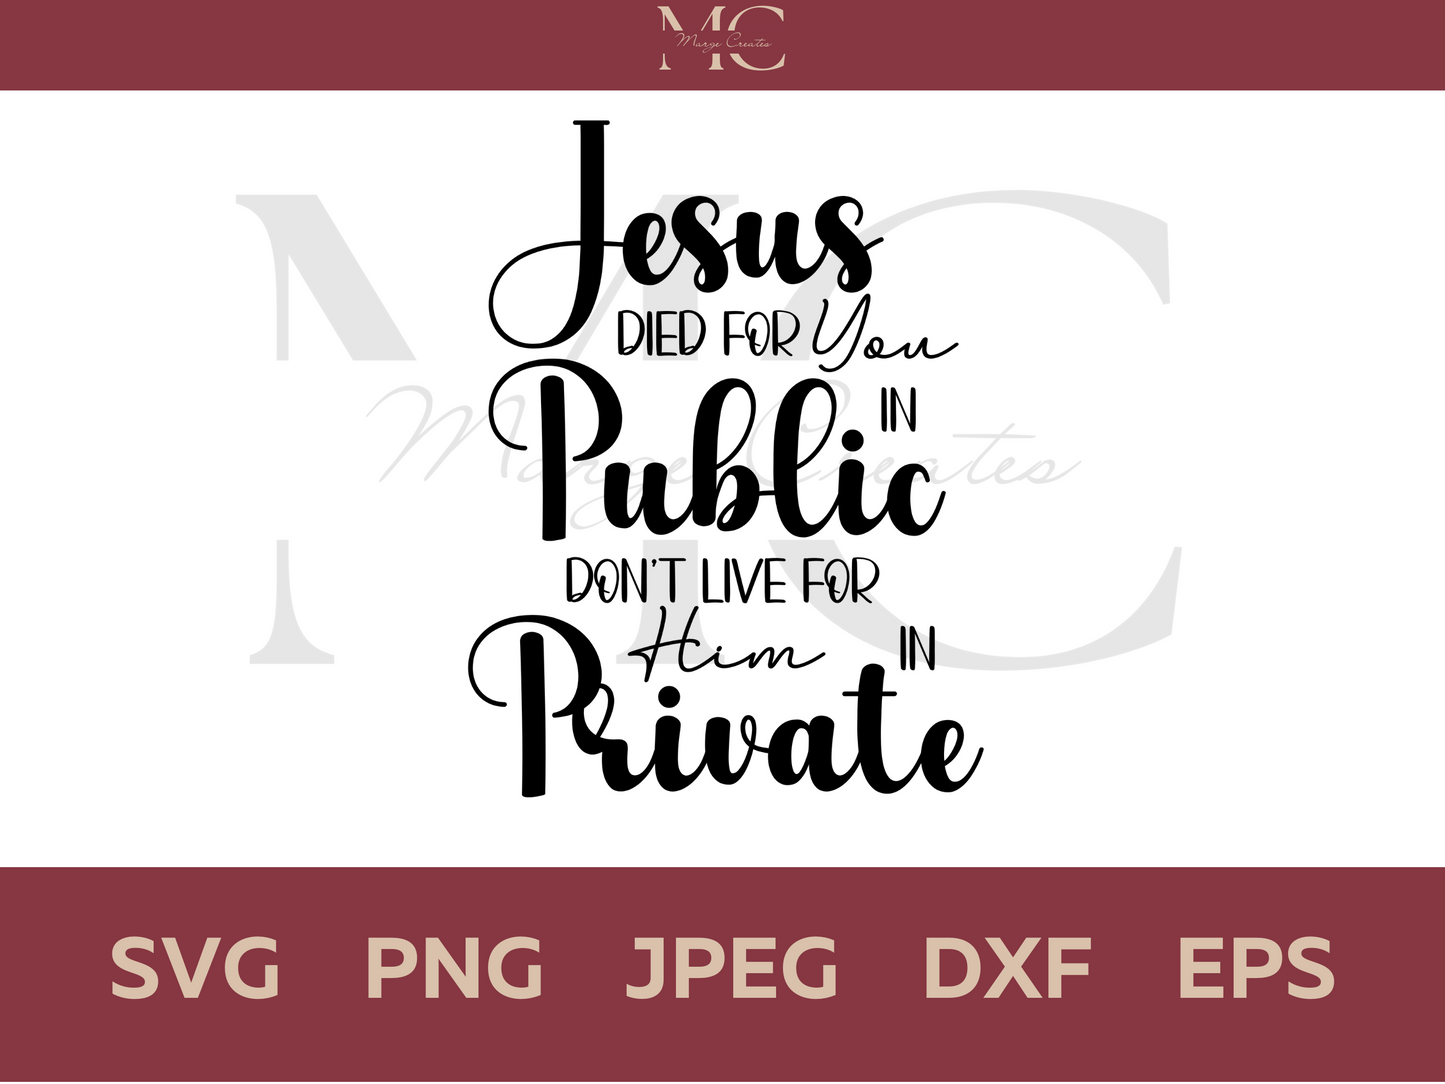 Jesus Died For You In Public, Don't Live For Him In Private PNG & SVG